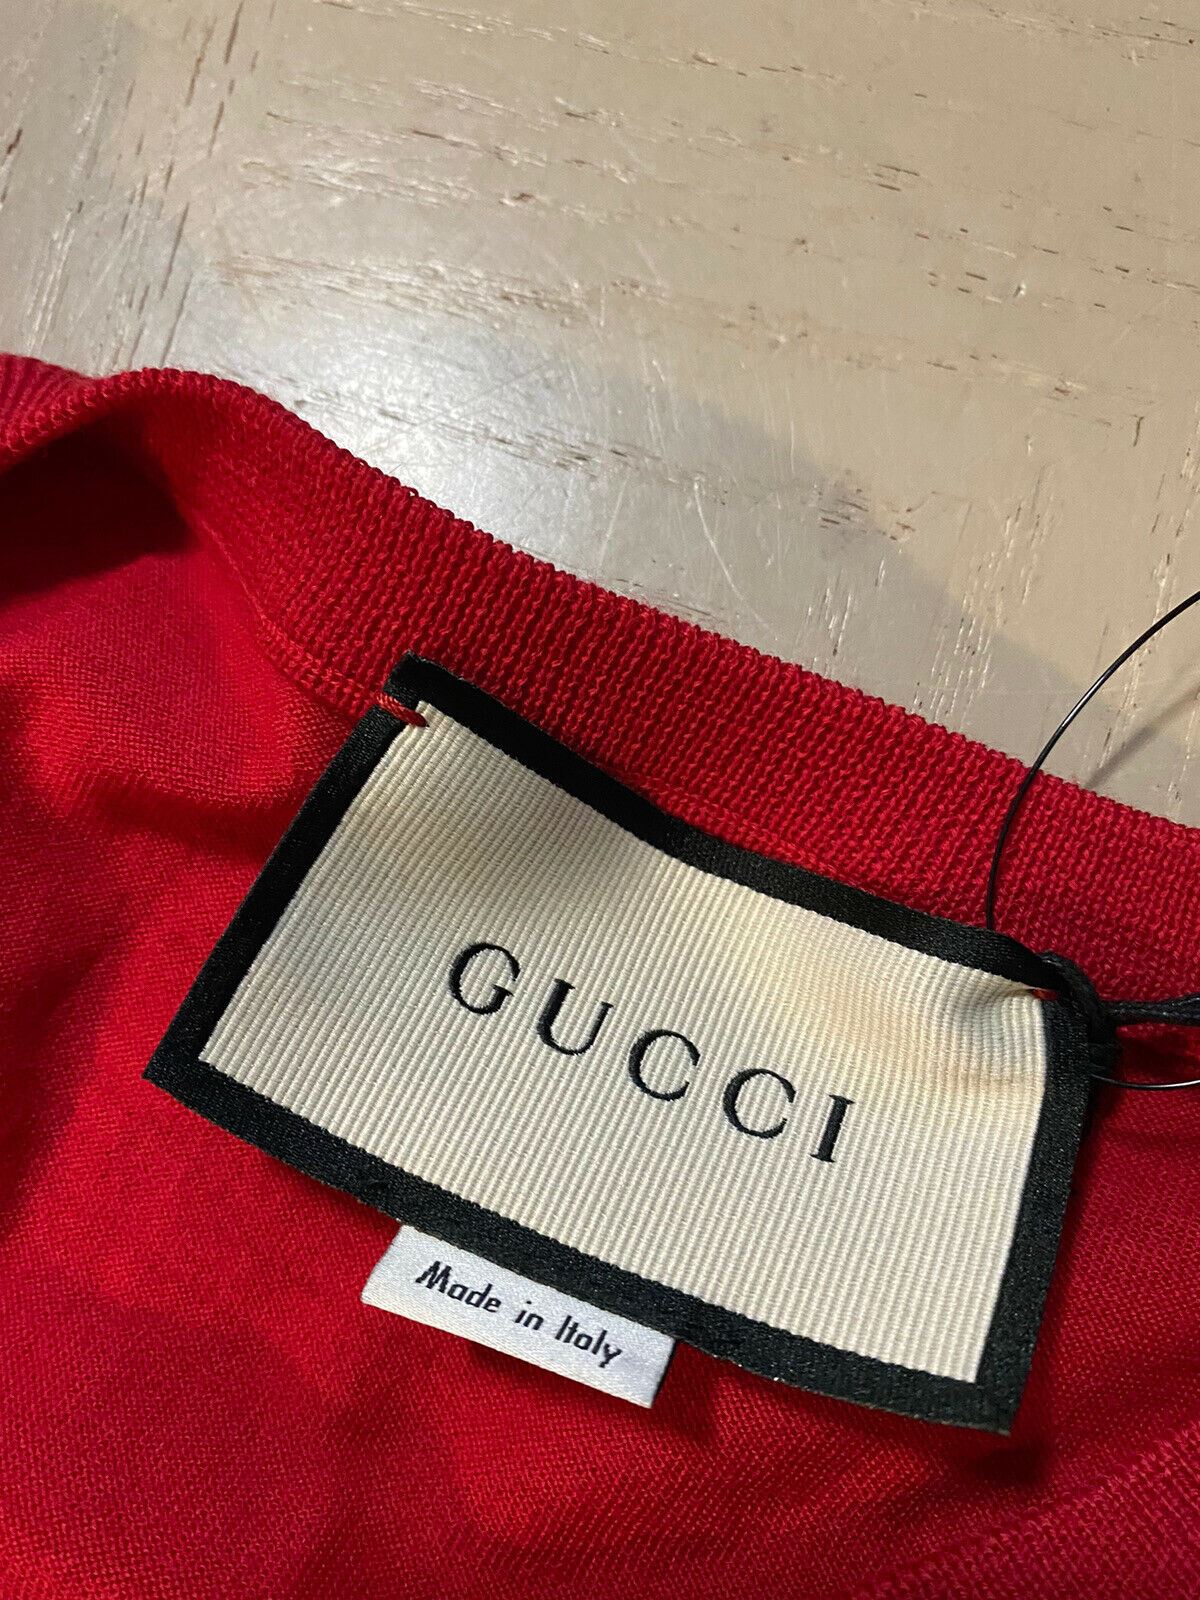 NWT $1200 Gucci Men Wool V Neck Sweater Red Size L Italy